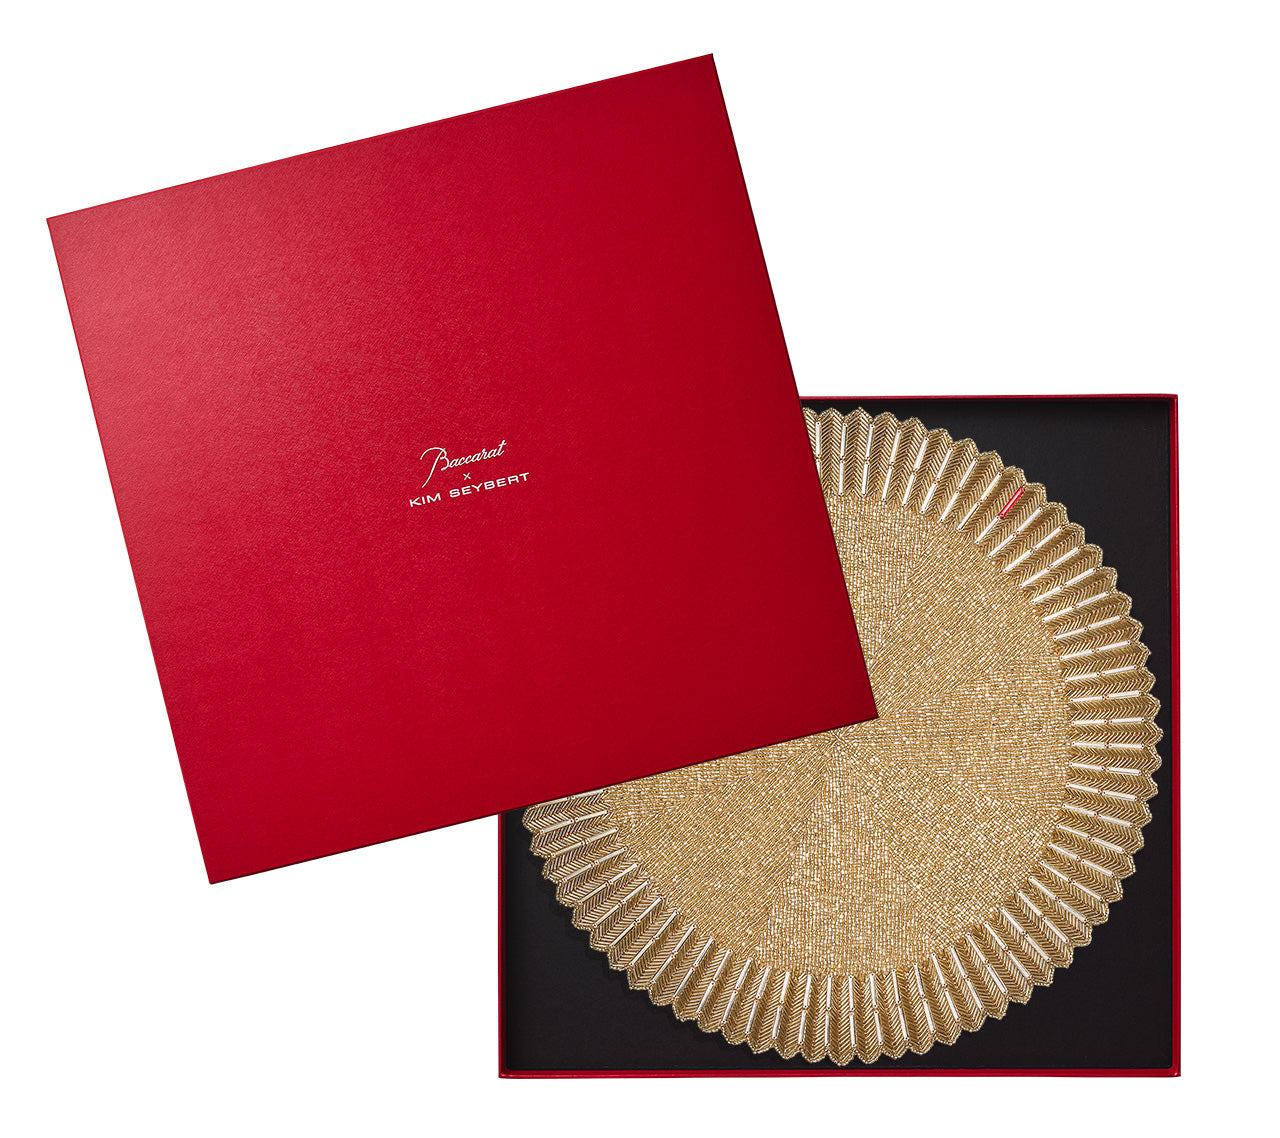 Etoile Placemat in Champagne, Set of 2 in a Gift Box